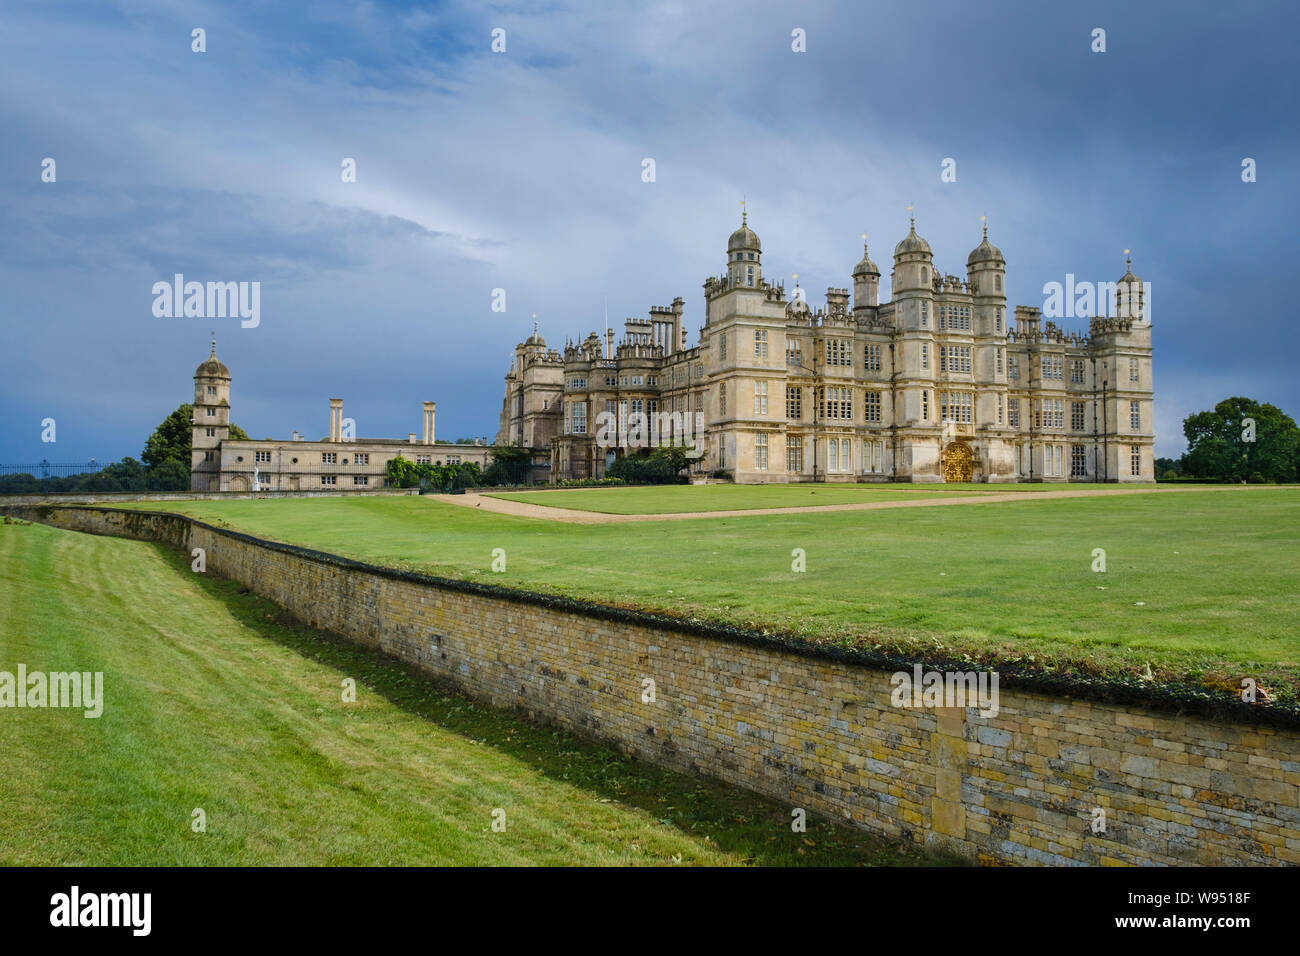 Burghley House historic sixteenth-century Elizabethan English country house / stately home  with Capability Brown landscaped gardens Stock Photo